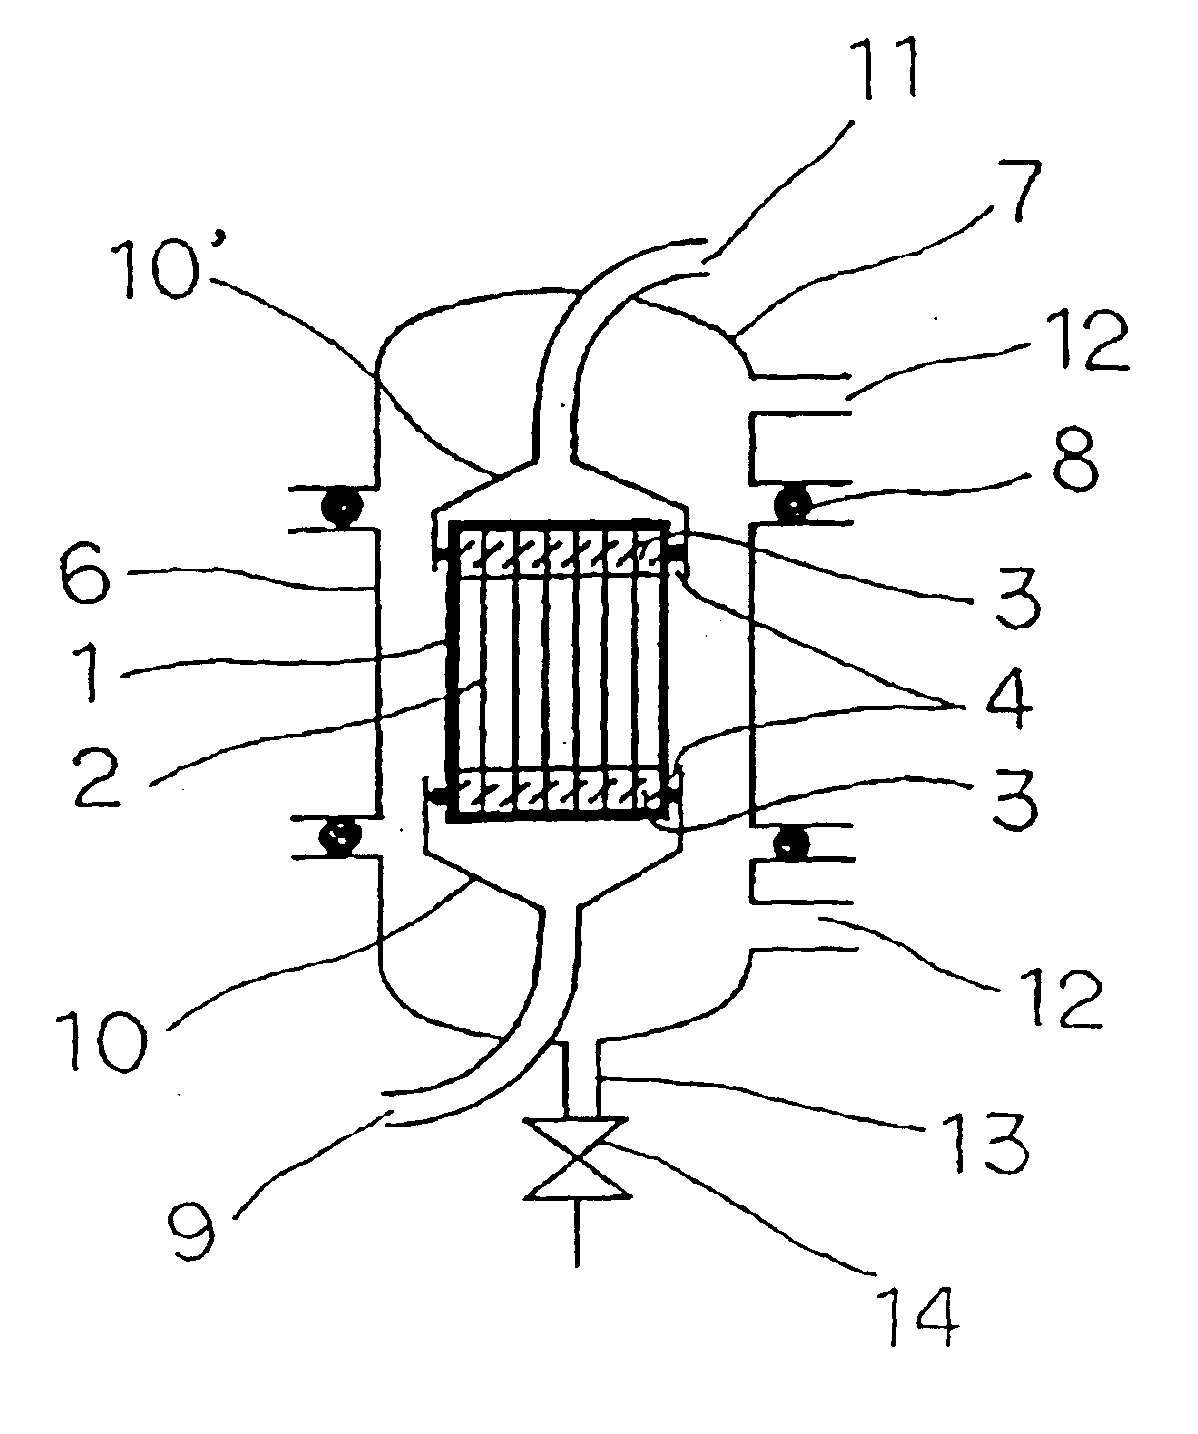 Hollow fiber membrane for the degassing of inks, ink degassing method, ink degassing apparatus, method for the fabrication of an ink cartridge, and ink